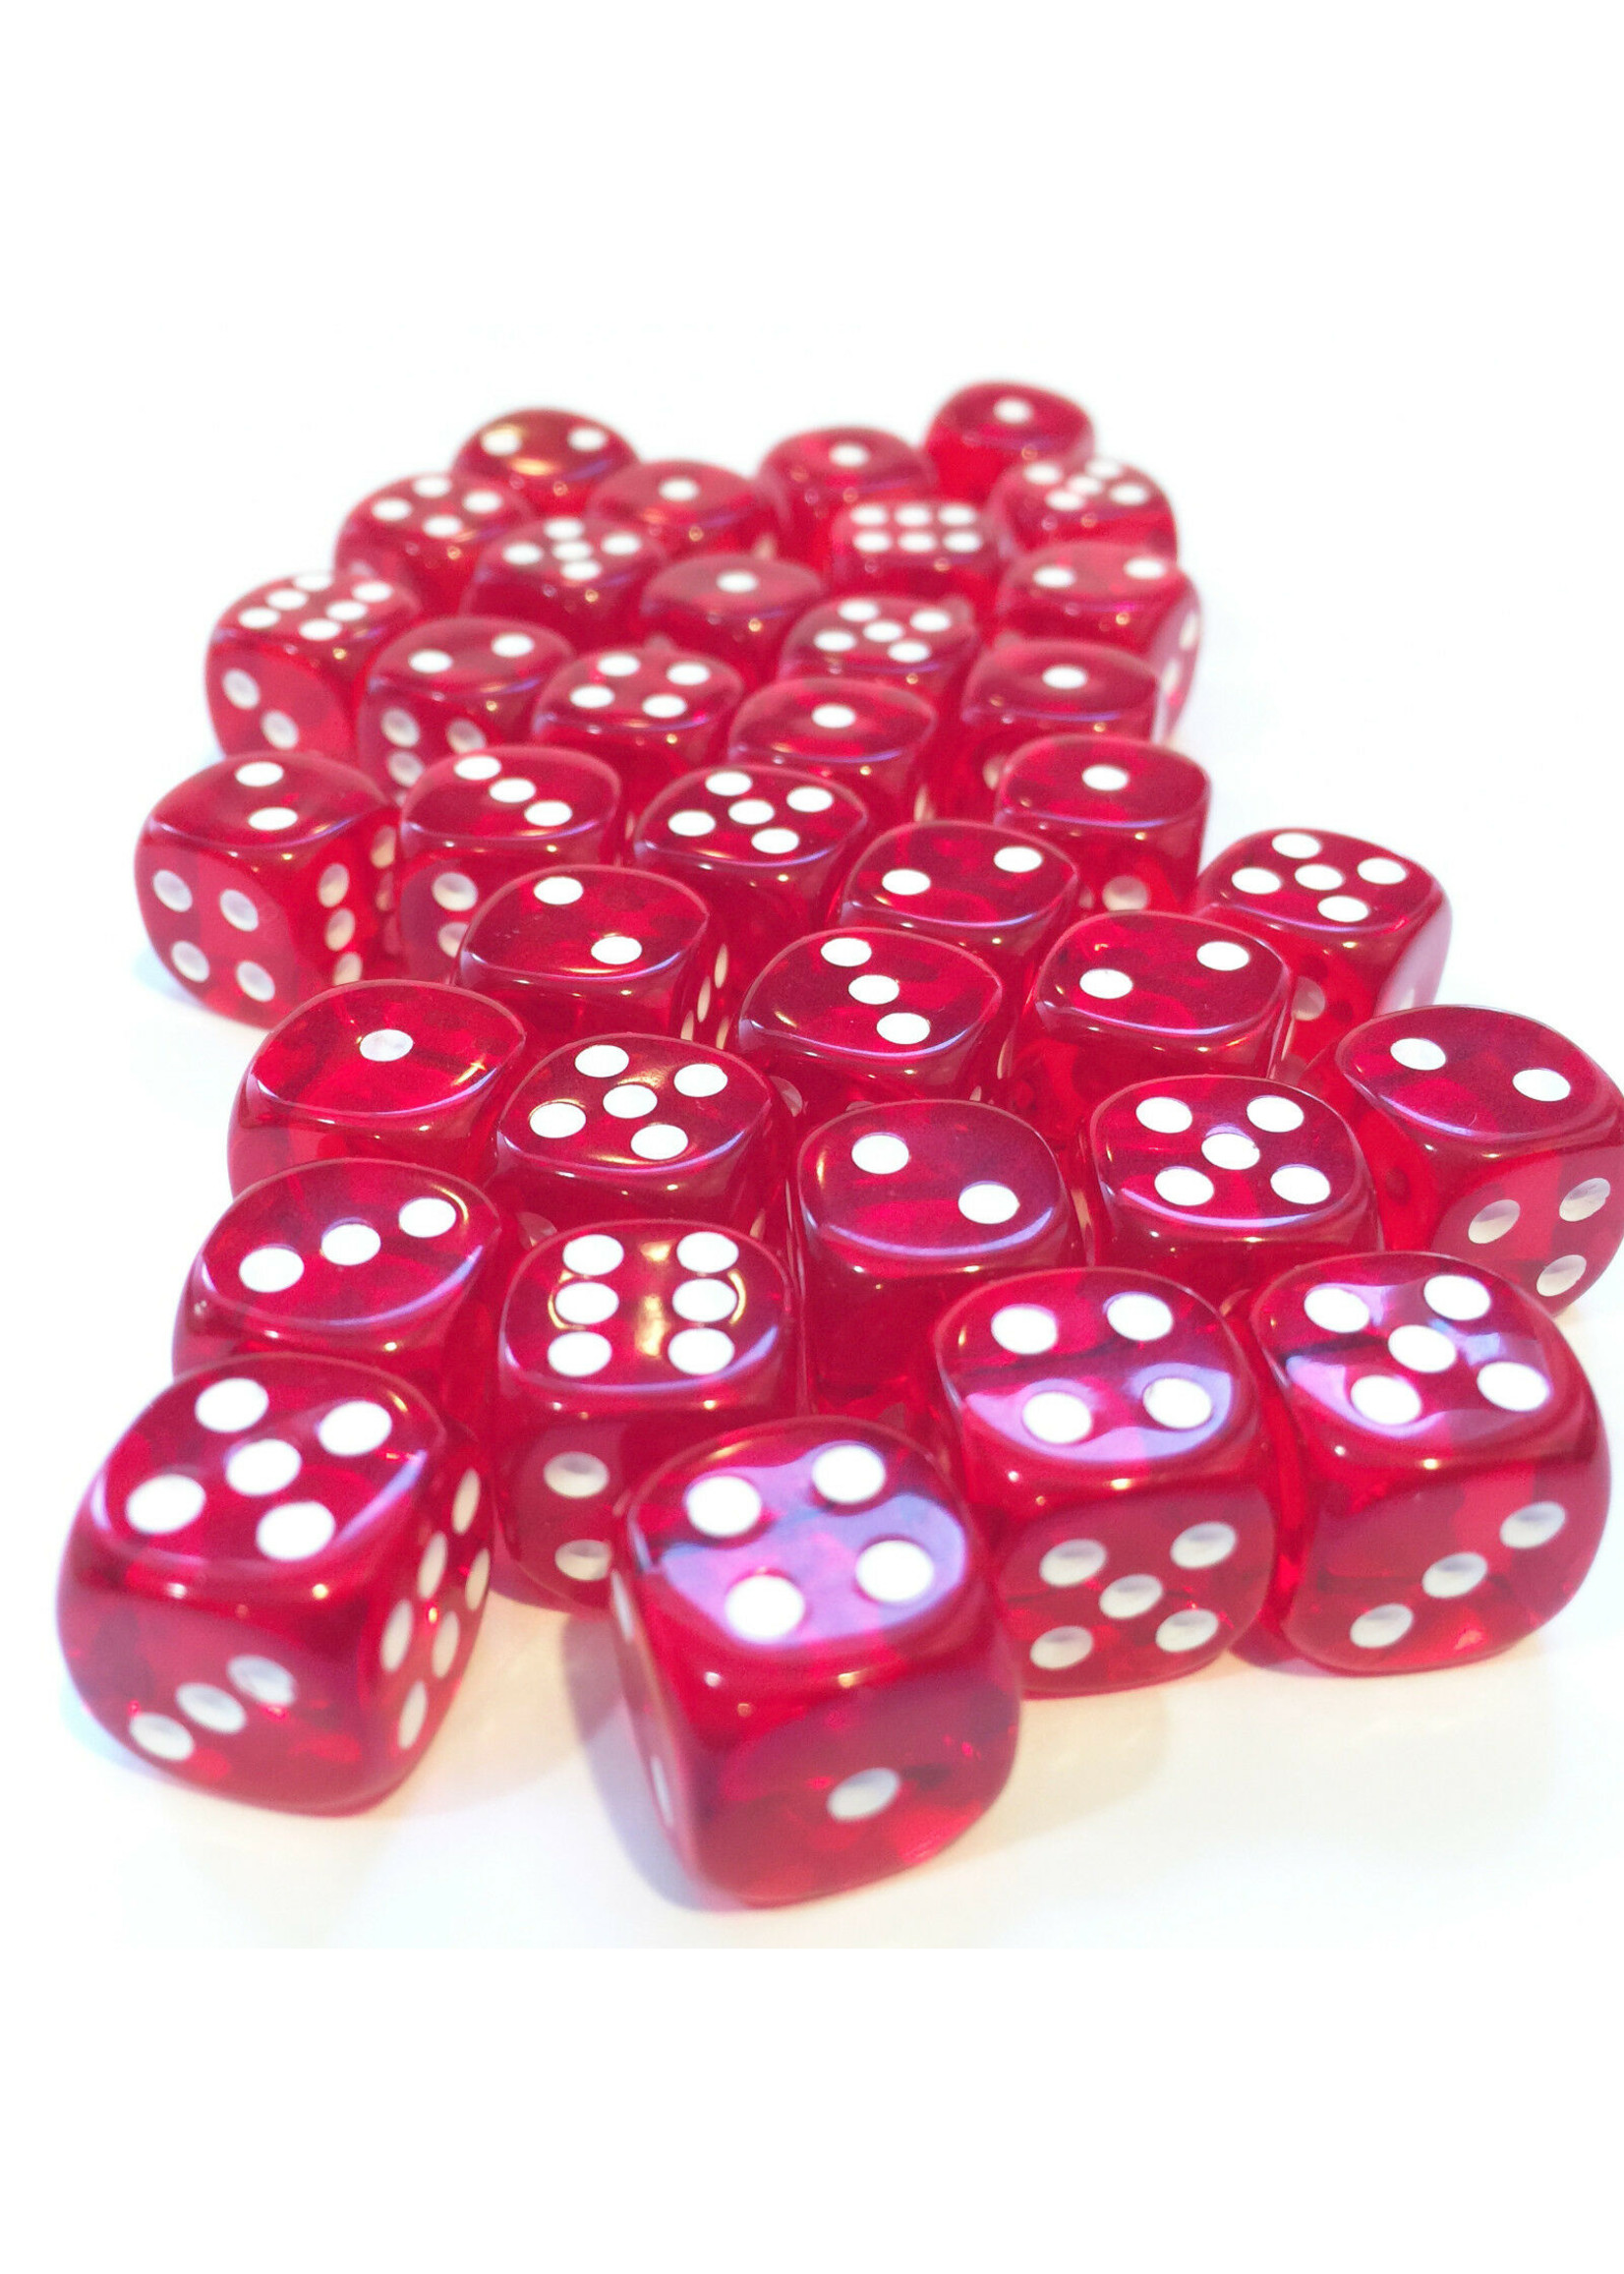 Translucent: 12mm D6 Red/White (36)